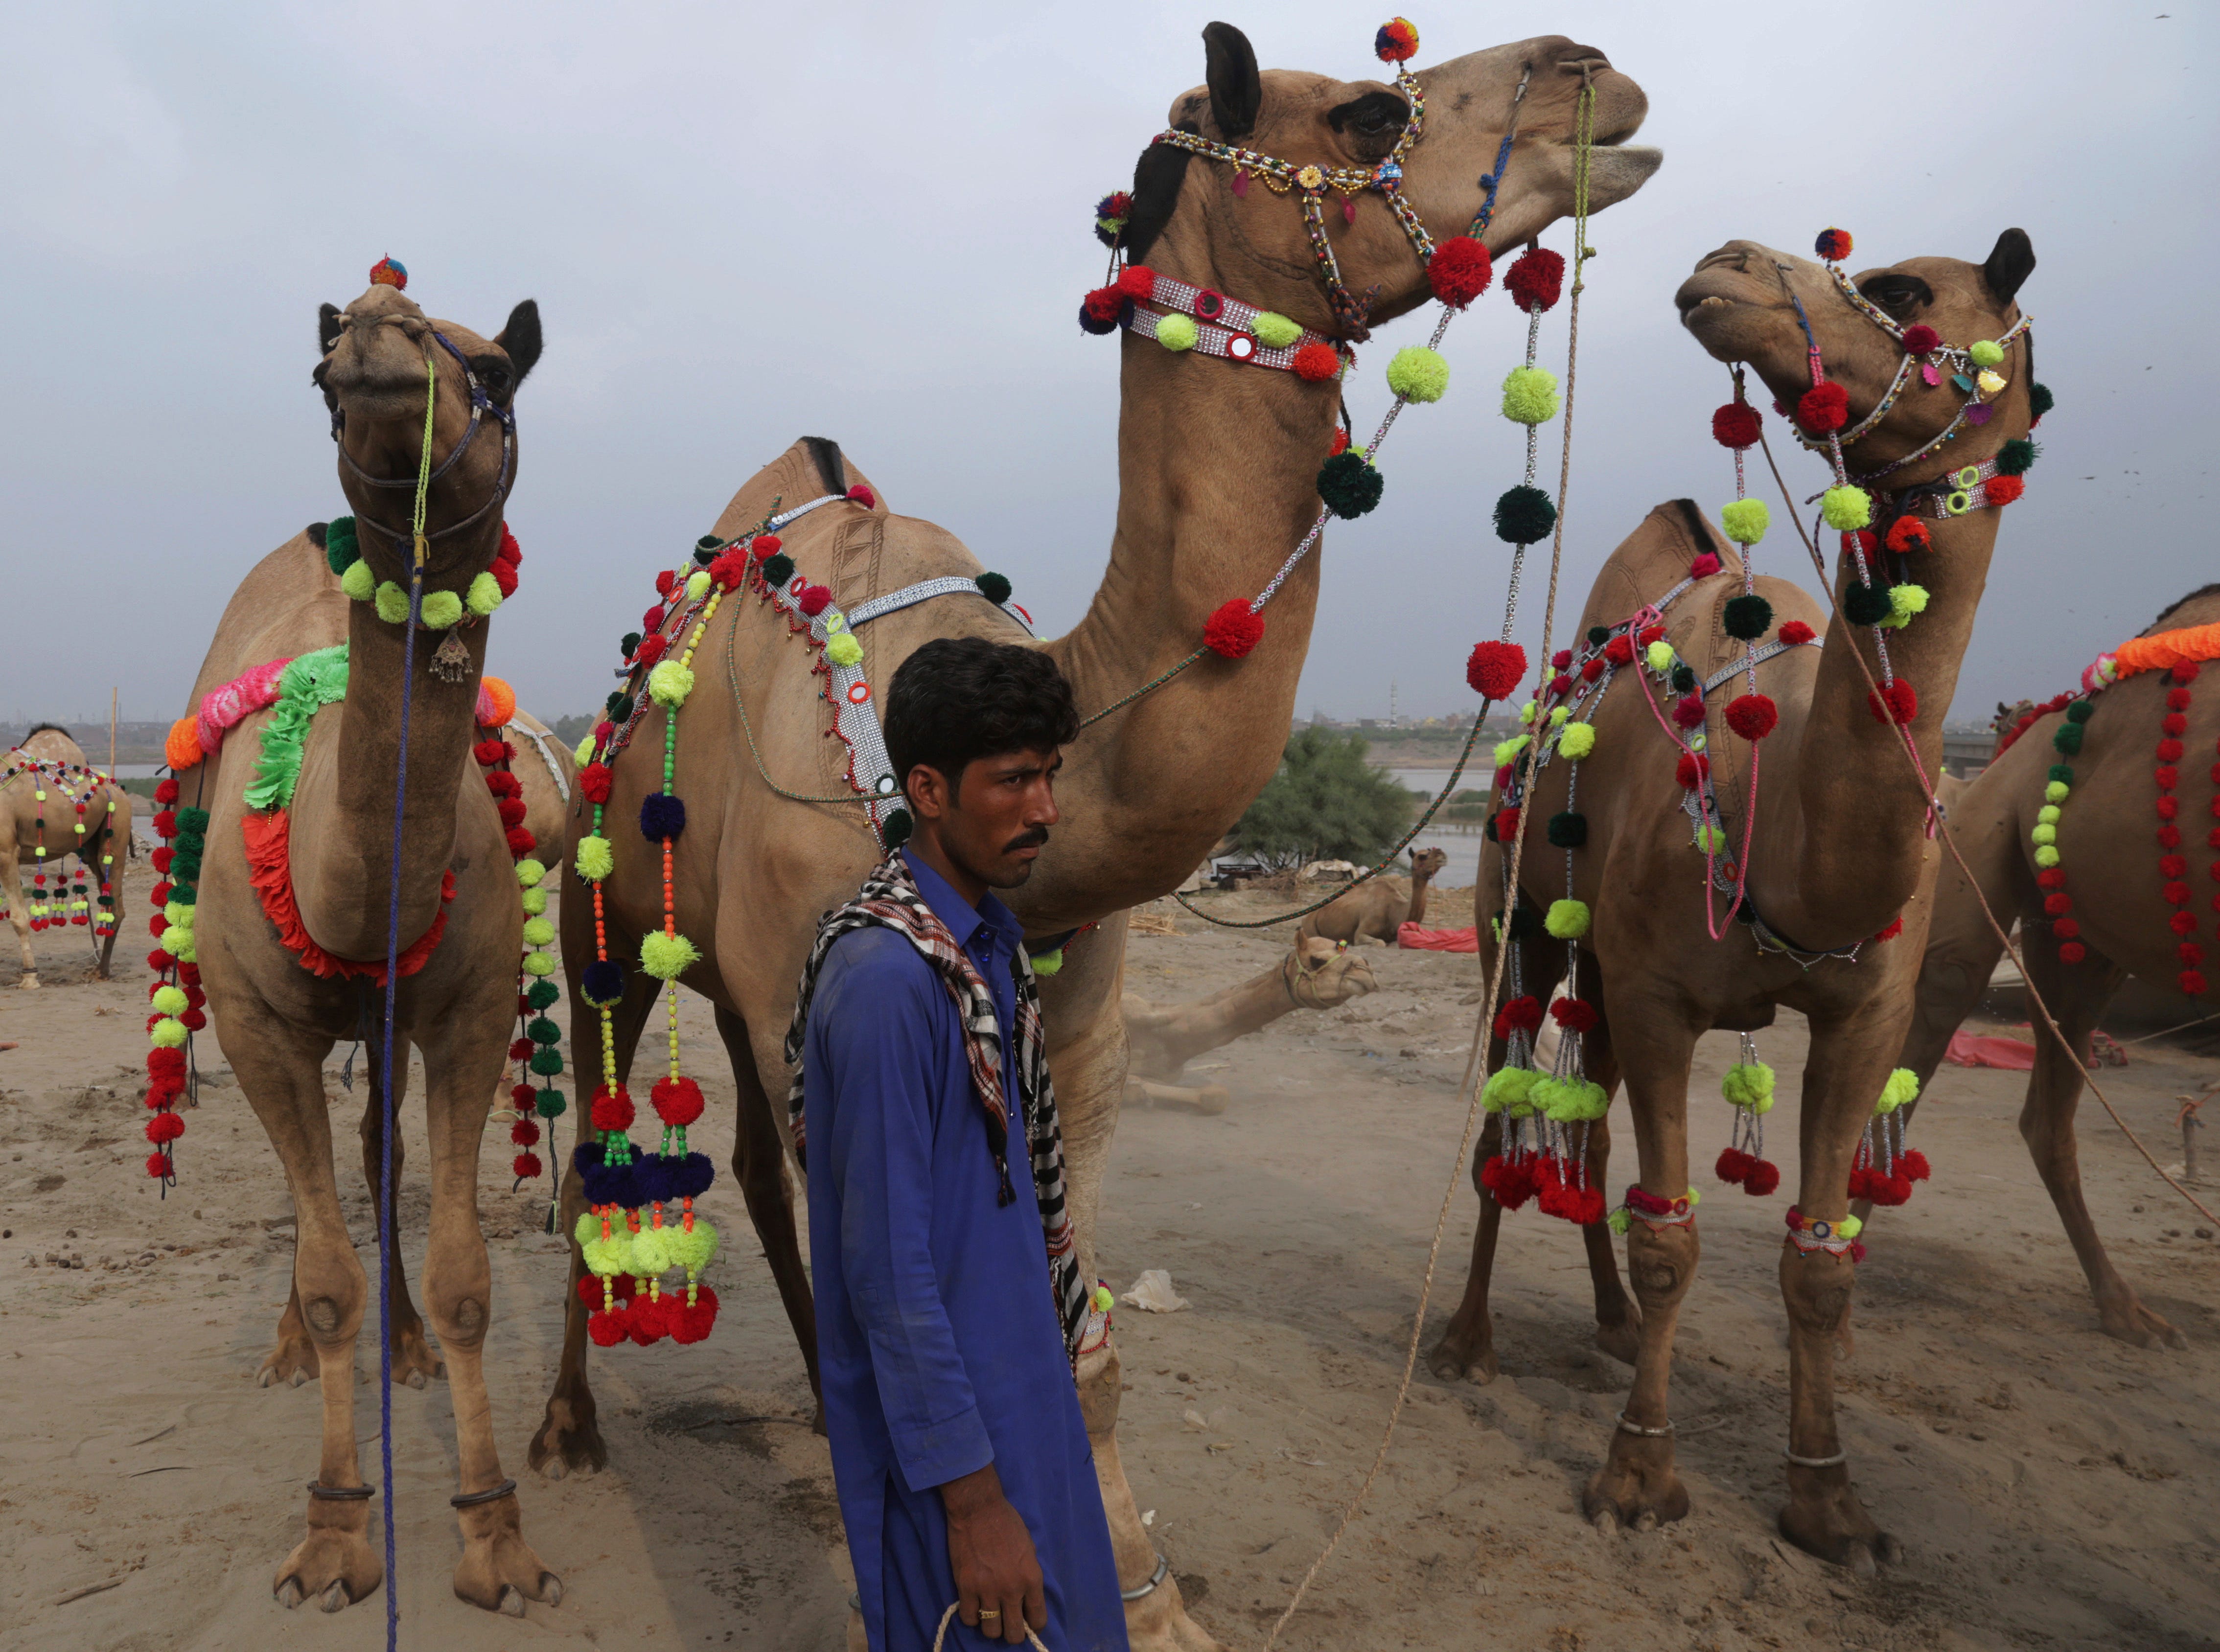 A Pakistani vendor waits for customers next to his camels decorated with colorful ribbons at a cattle market set up for the upcoming Muslim Eid al-Adha holiday, in Lahore, Pakistan, Sunday, Aug. 12, 2018. Eid al-Adha, or Feast of Sacrifice, Islam's m